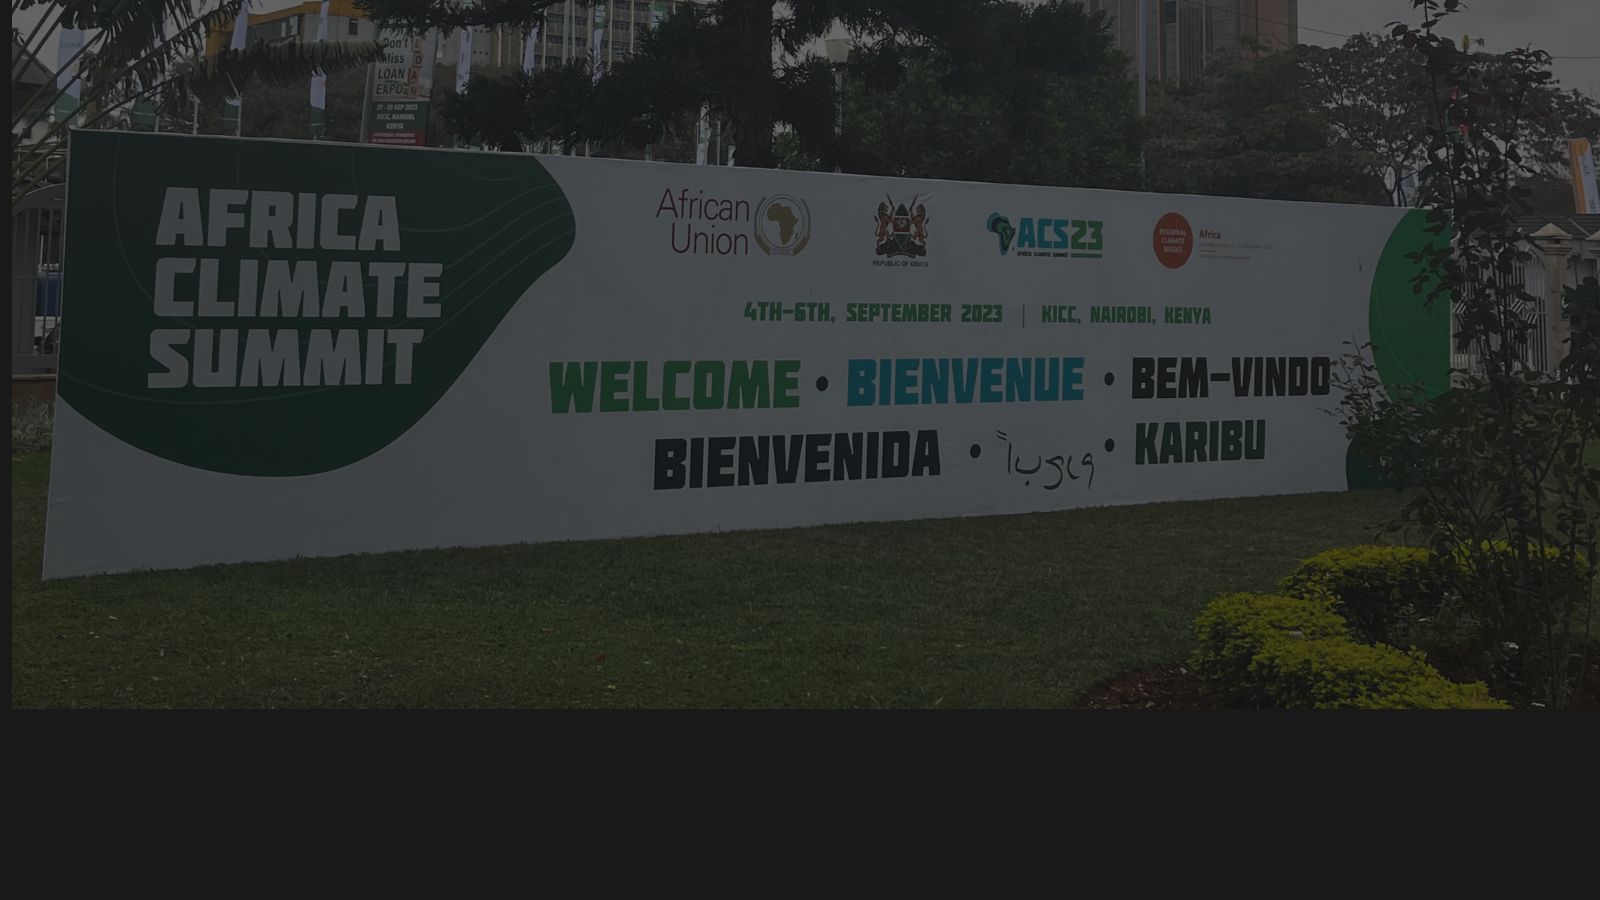 Top Accounts to follow for the Africa Climate Summit updates